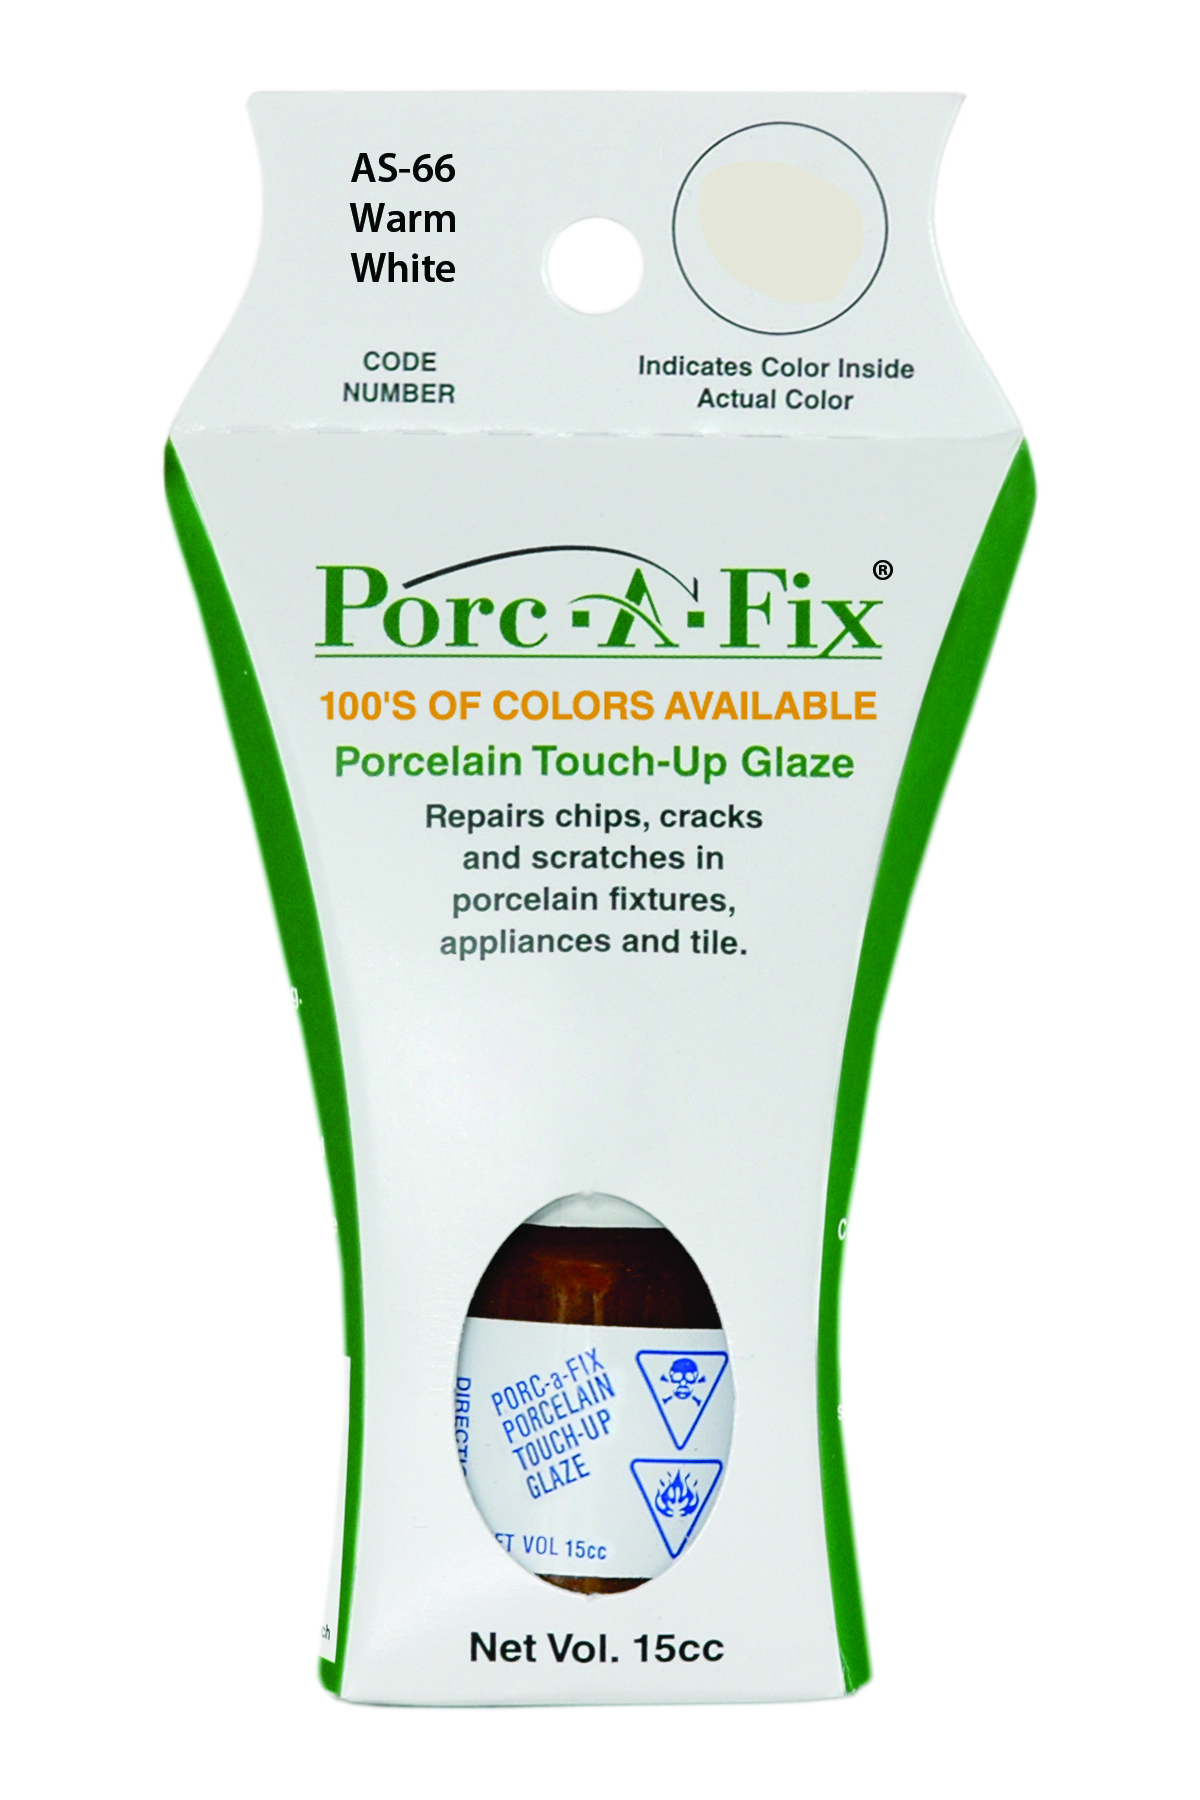 Fixture-Fix | AS-66 | Porc-A-Fix Touch-Up Glaze American Standard Warm White - Compatible with American Standard 070900-0210A Touch Up Paint Kit - WARM WHITE